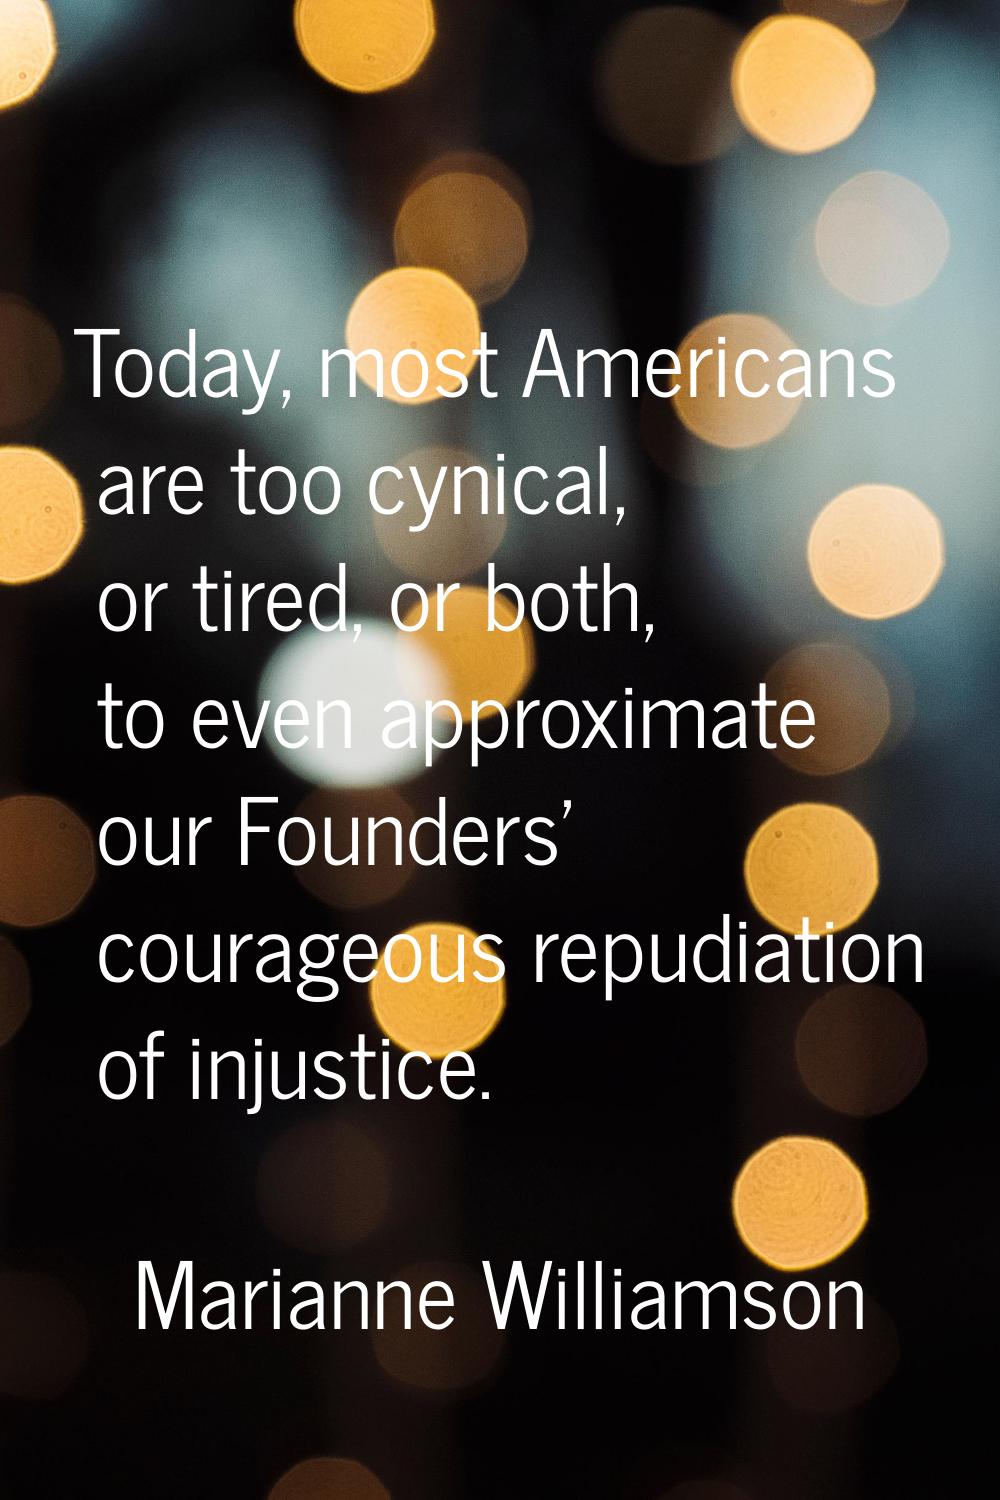 Today, most Americans are too cynical, or tired, or both, to even approximate our Founders' courage